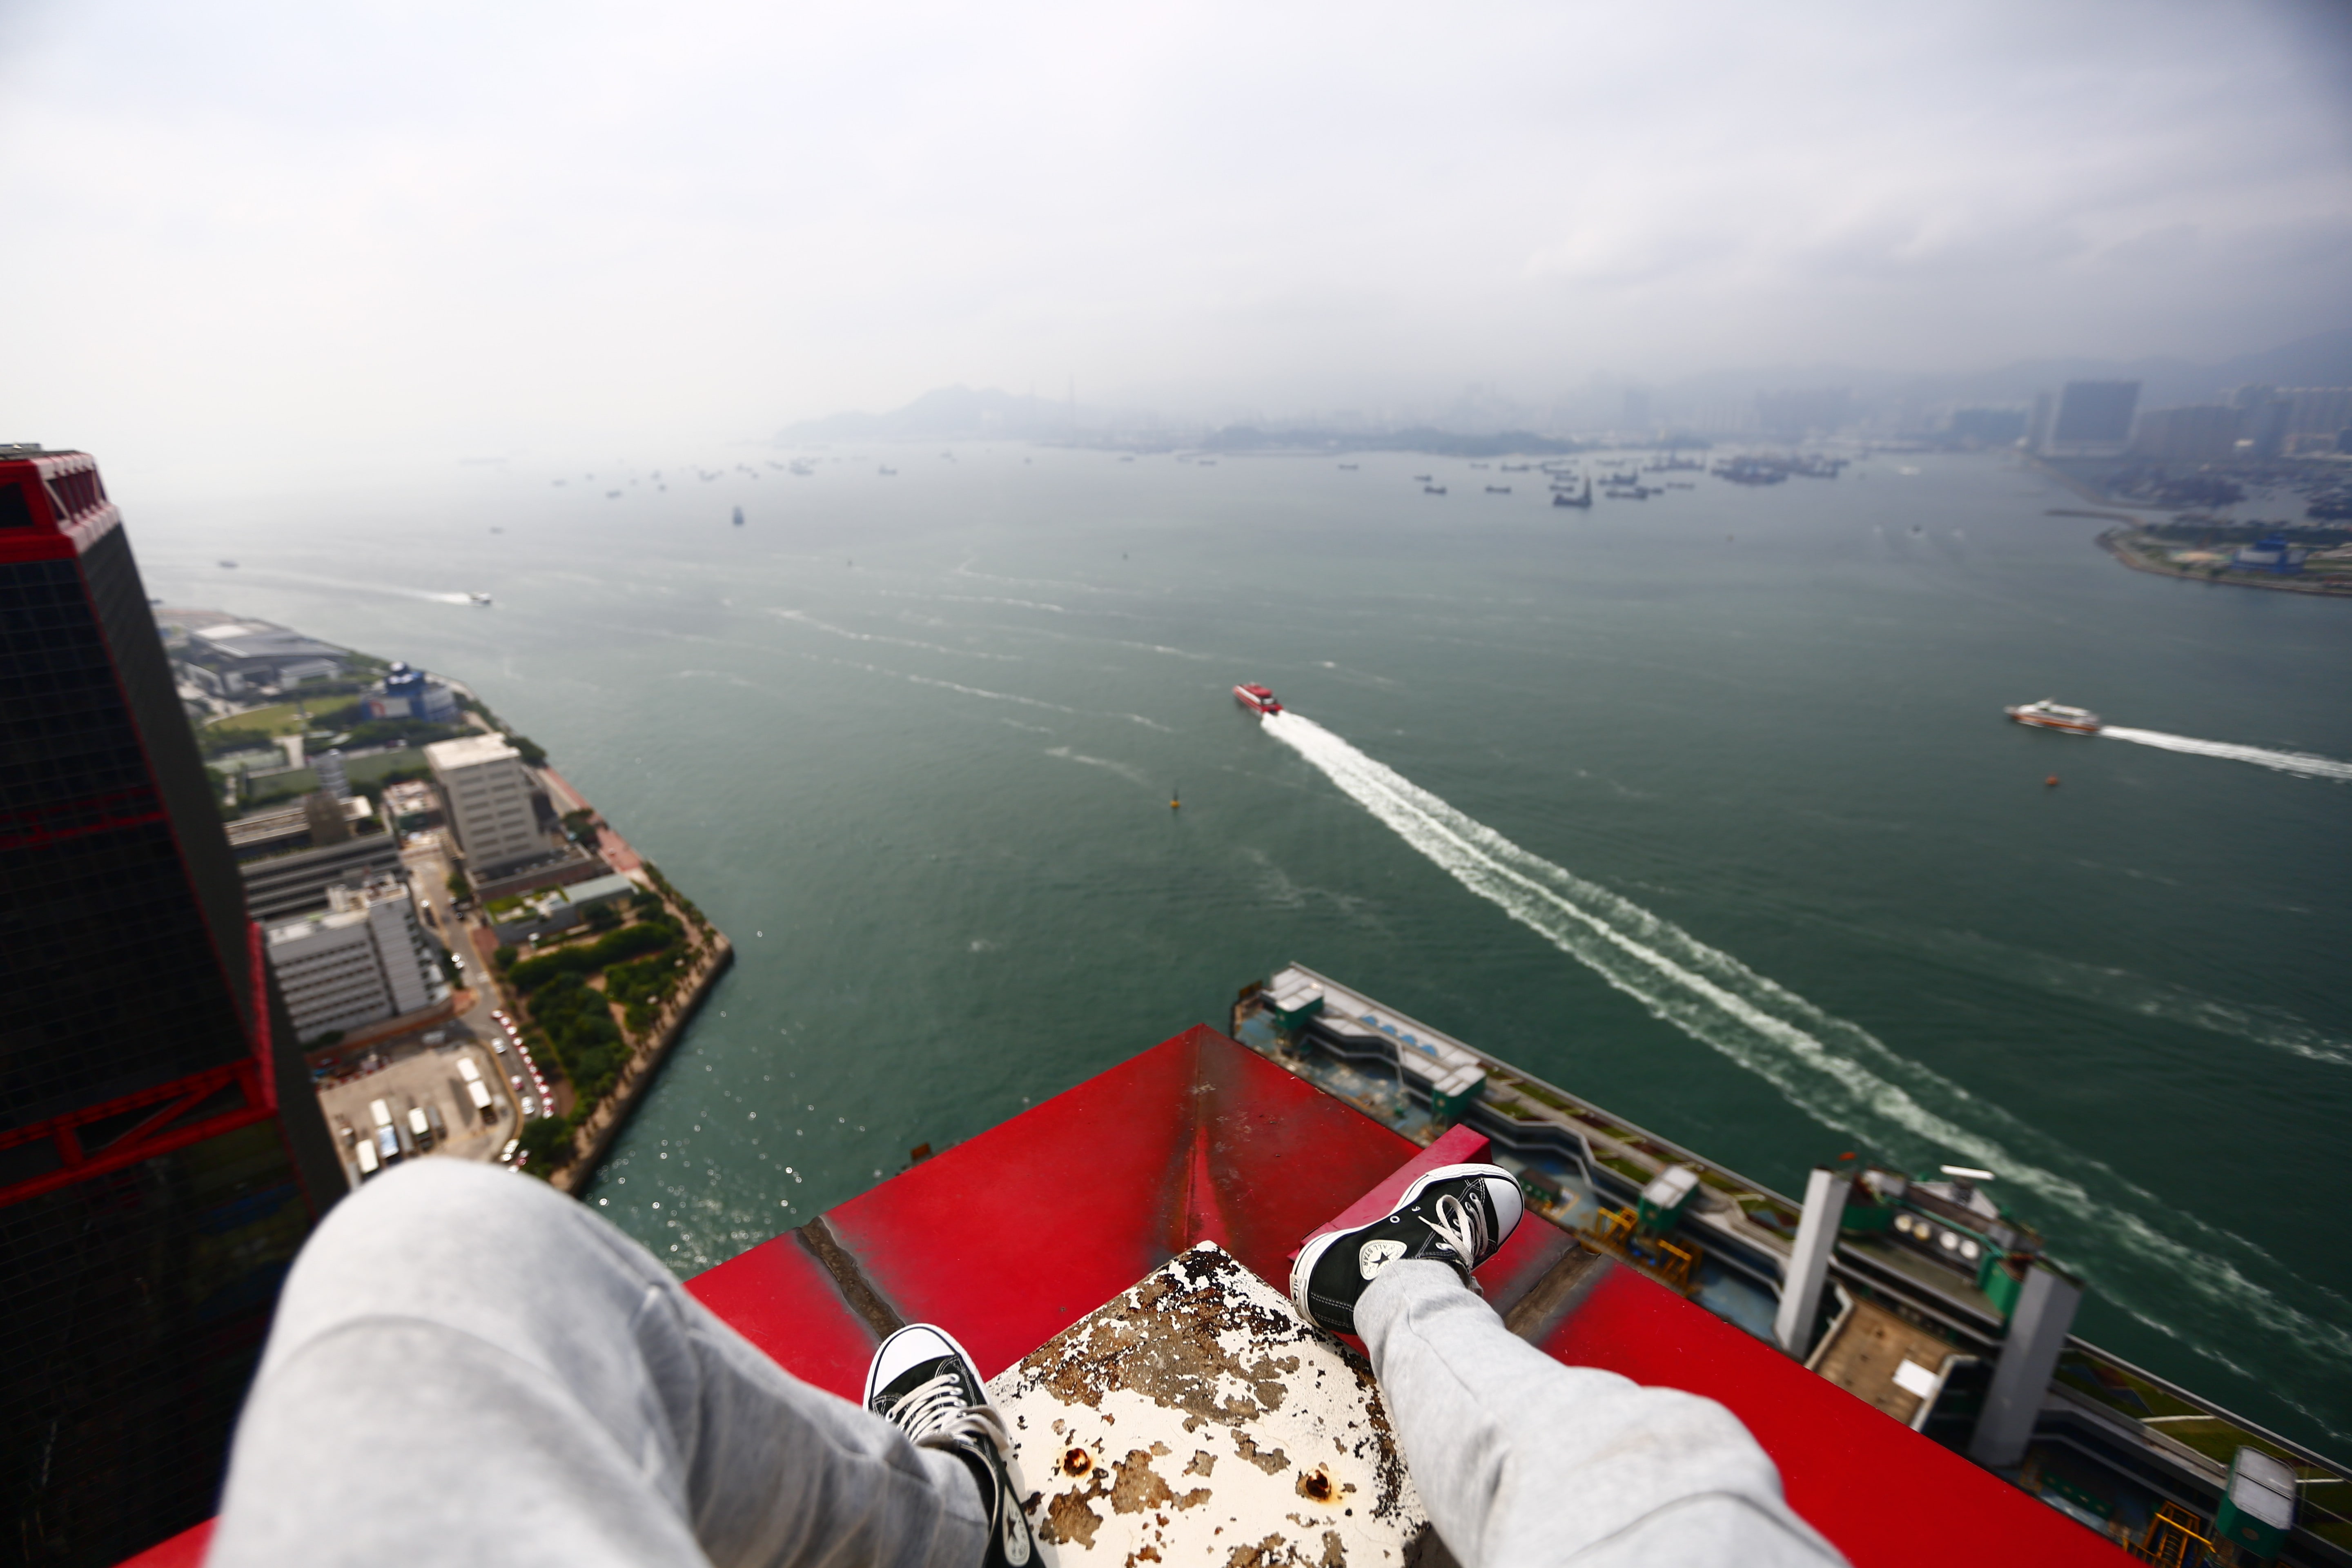 point of view, boat, rooftops, sea, heights, water, transportation